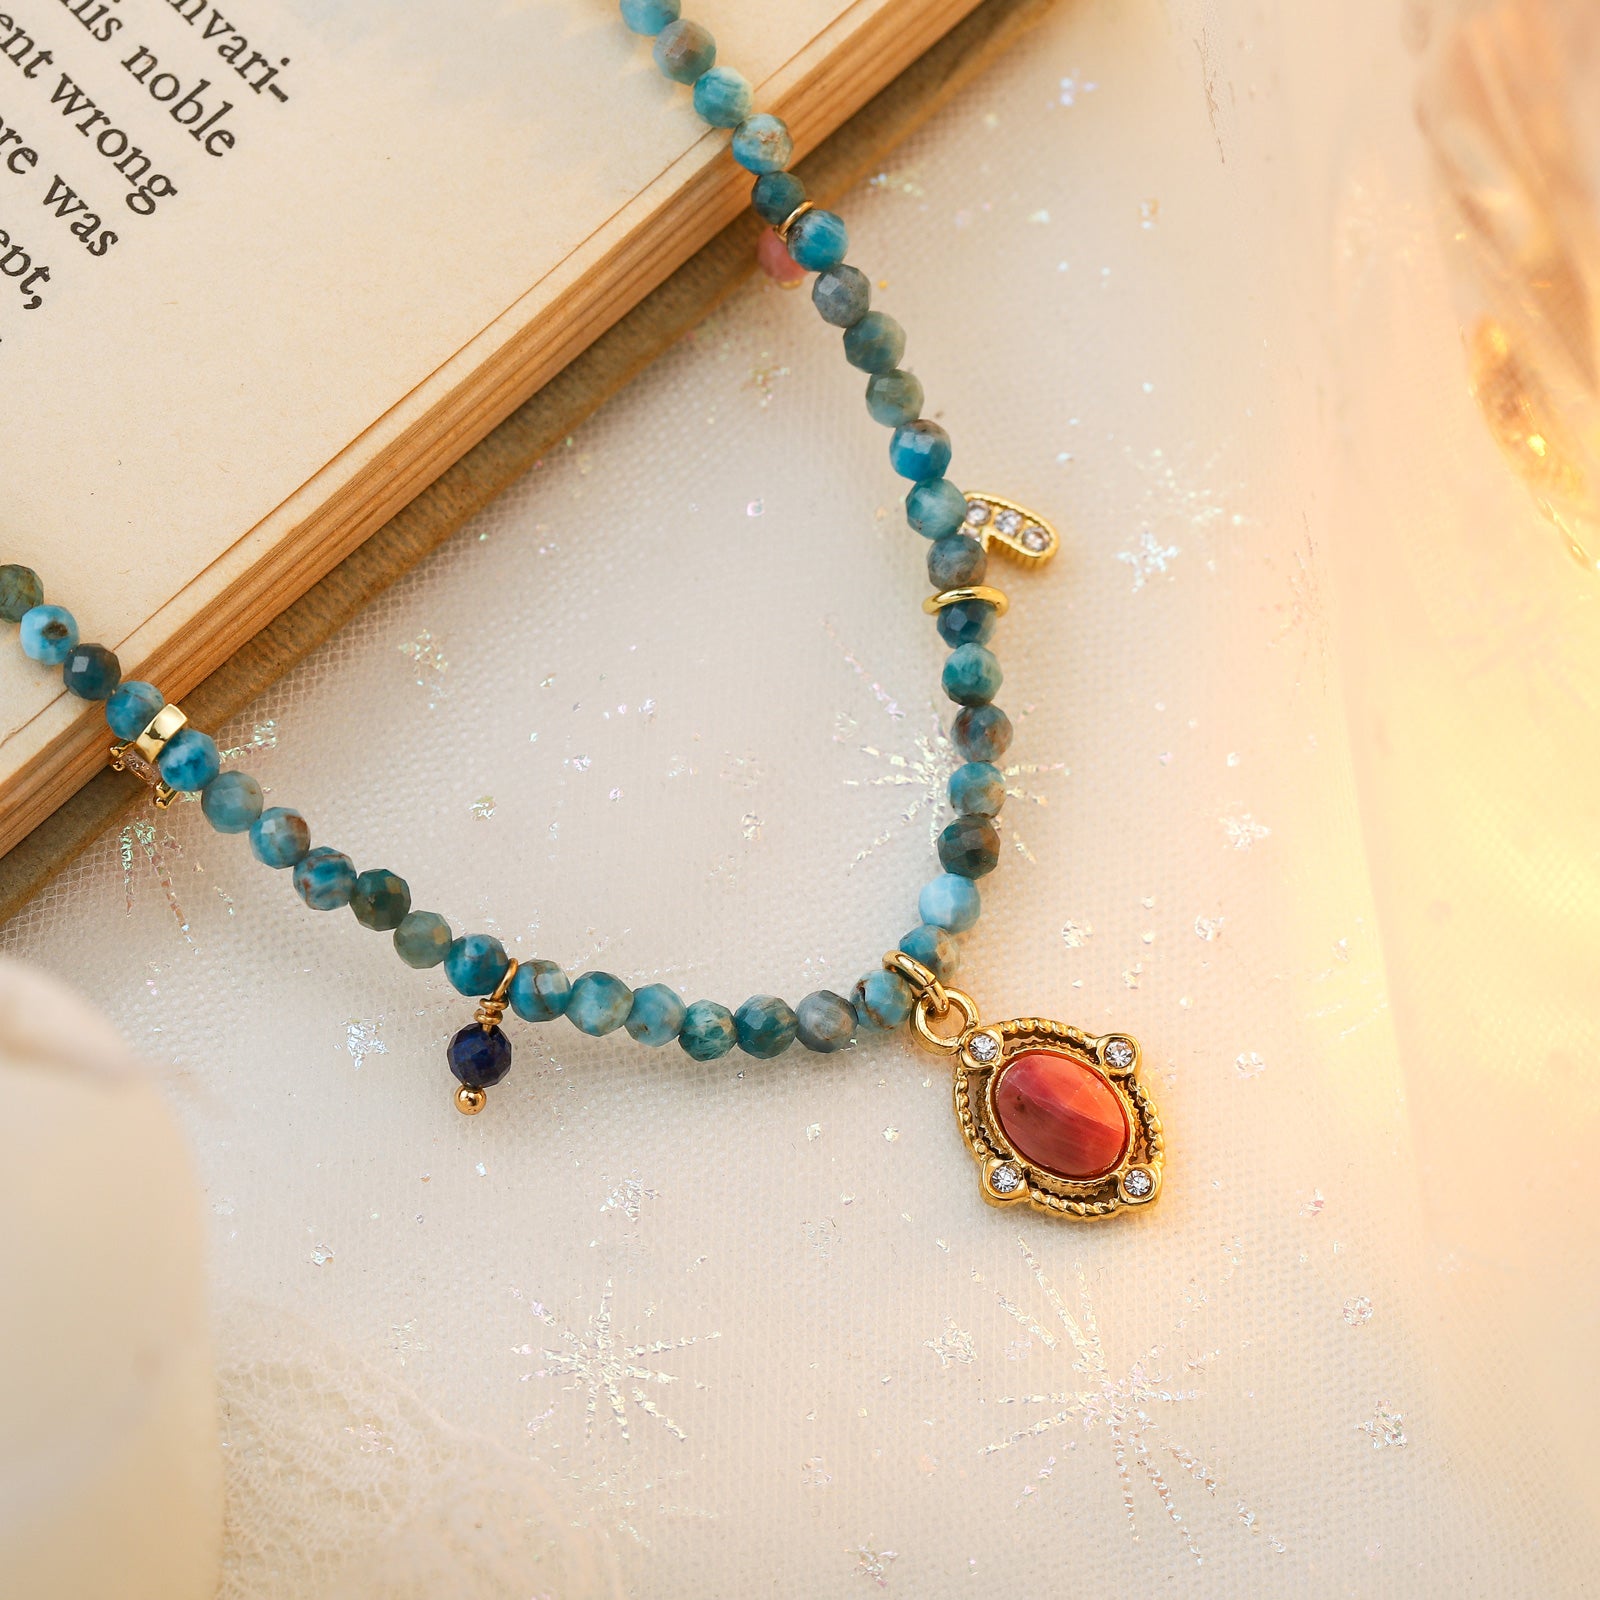 Vintage Oval Red Agate Pendant With Lapis Lazuli Beaded Chain